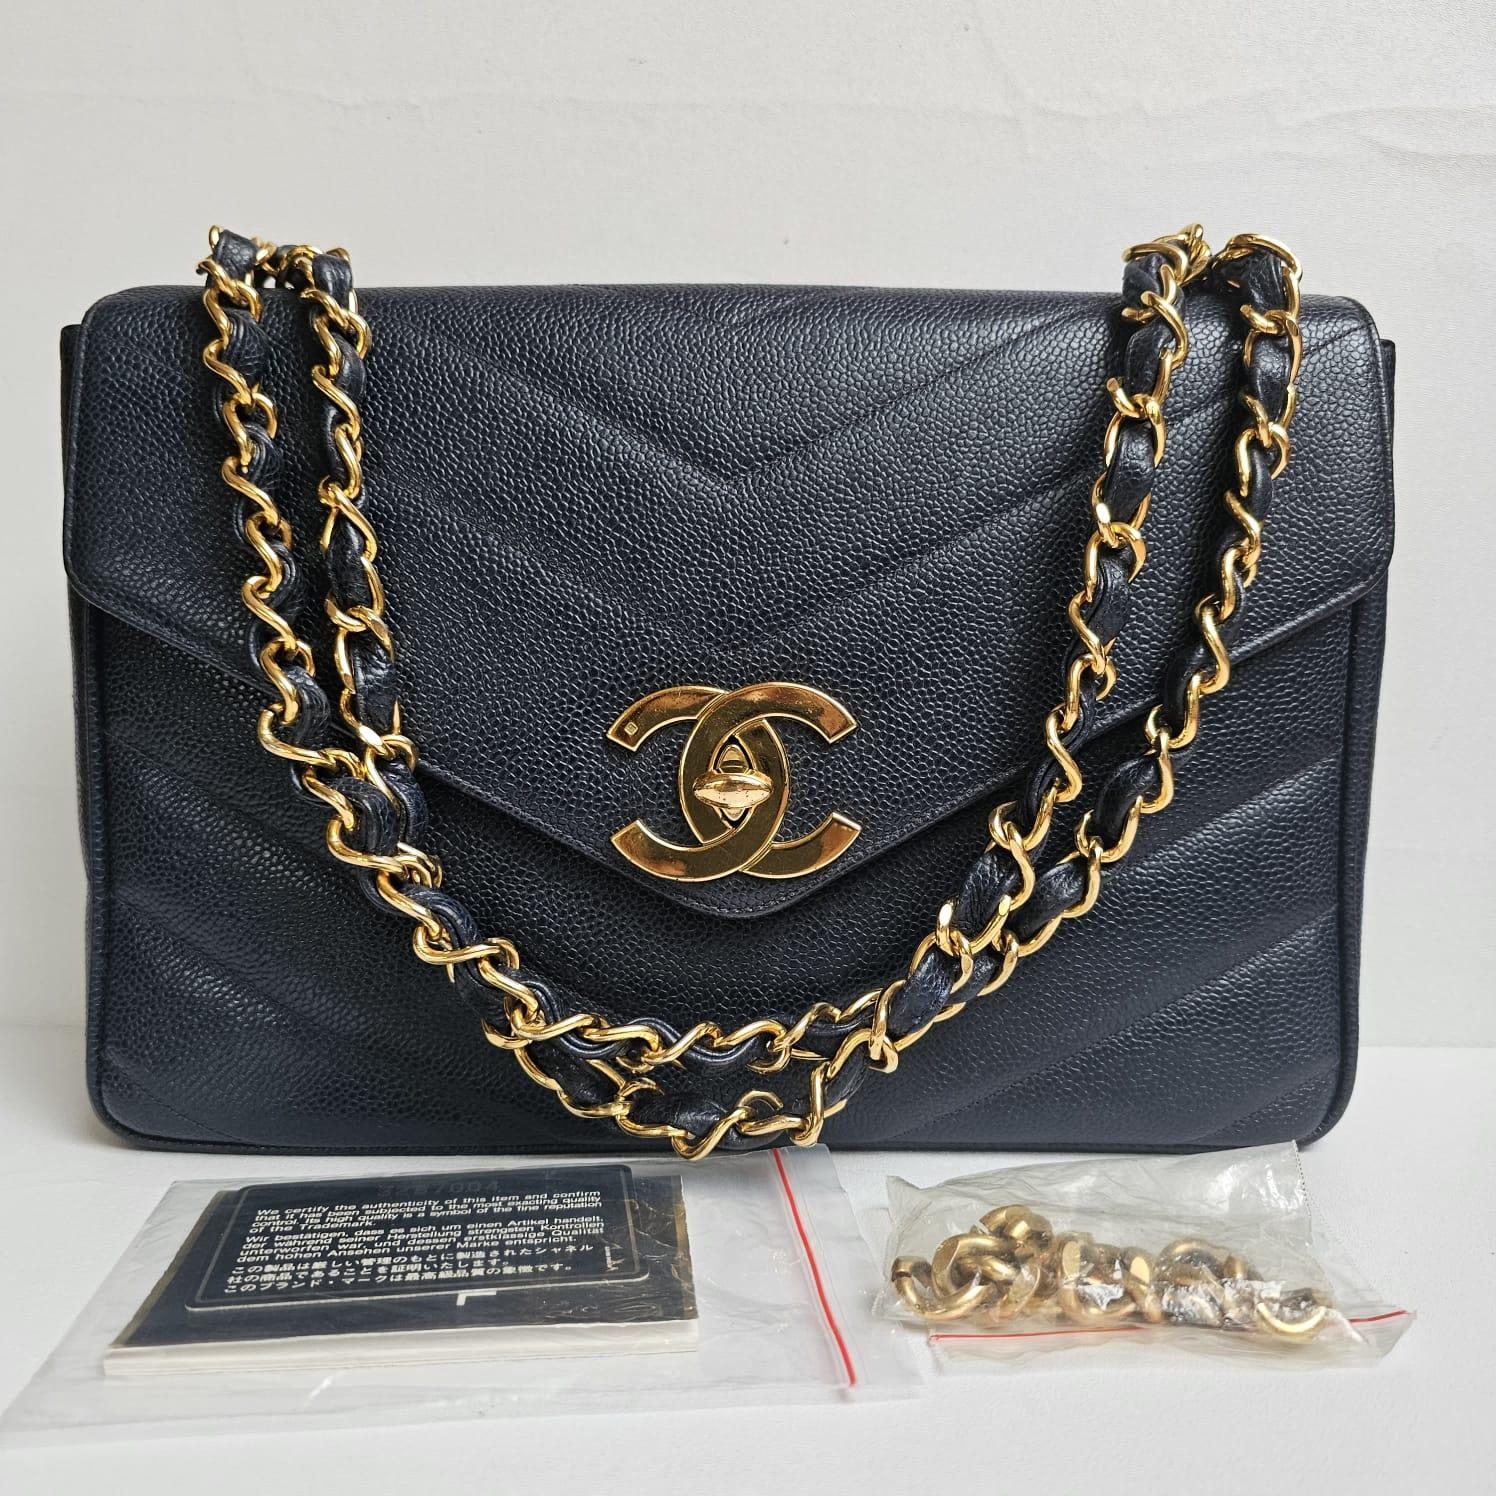 Rare vintage jumbo chevron quilt flap bag in blue caviar leather. Very good vintage condition overall. Series #3. The chain strap has been altered to only be worn as shoulder bag (the removed chain is included). Comes with its holo and card.